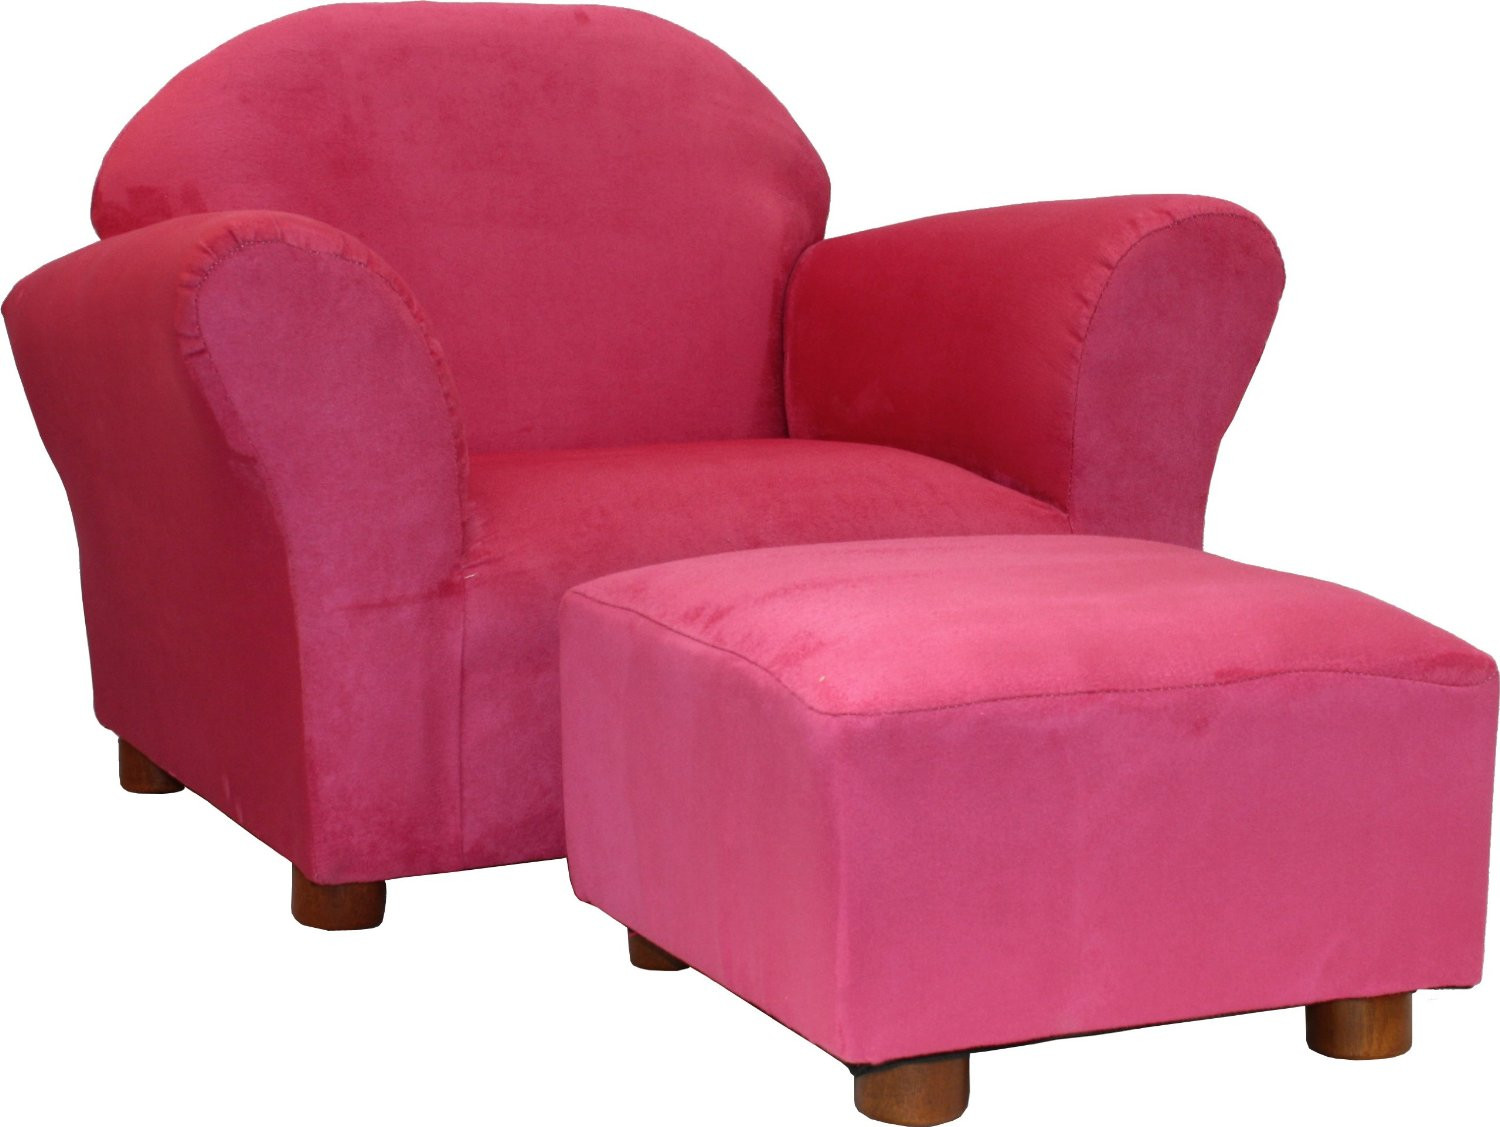 Kids Chair with Ottoman Lovely Kids &amp; toddler Chair and Ottoman Sets